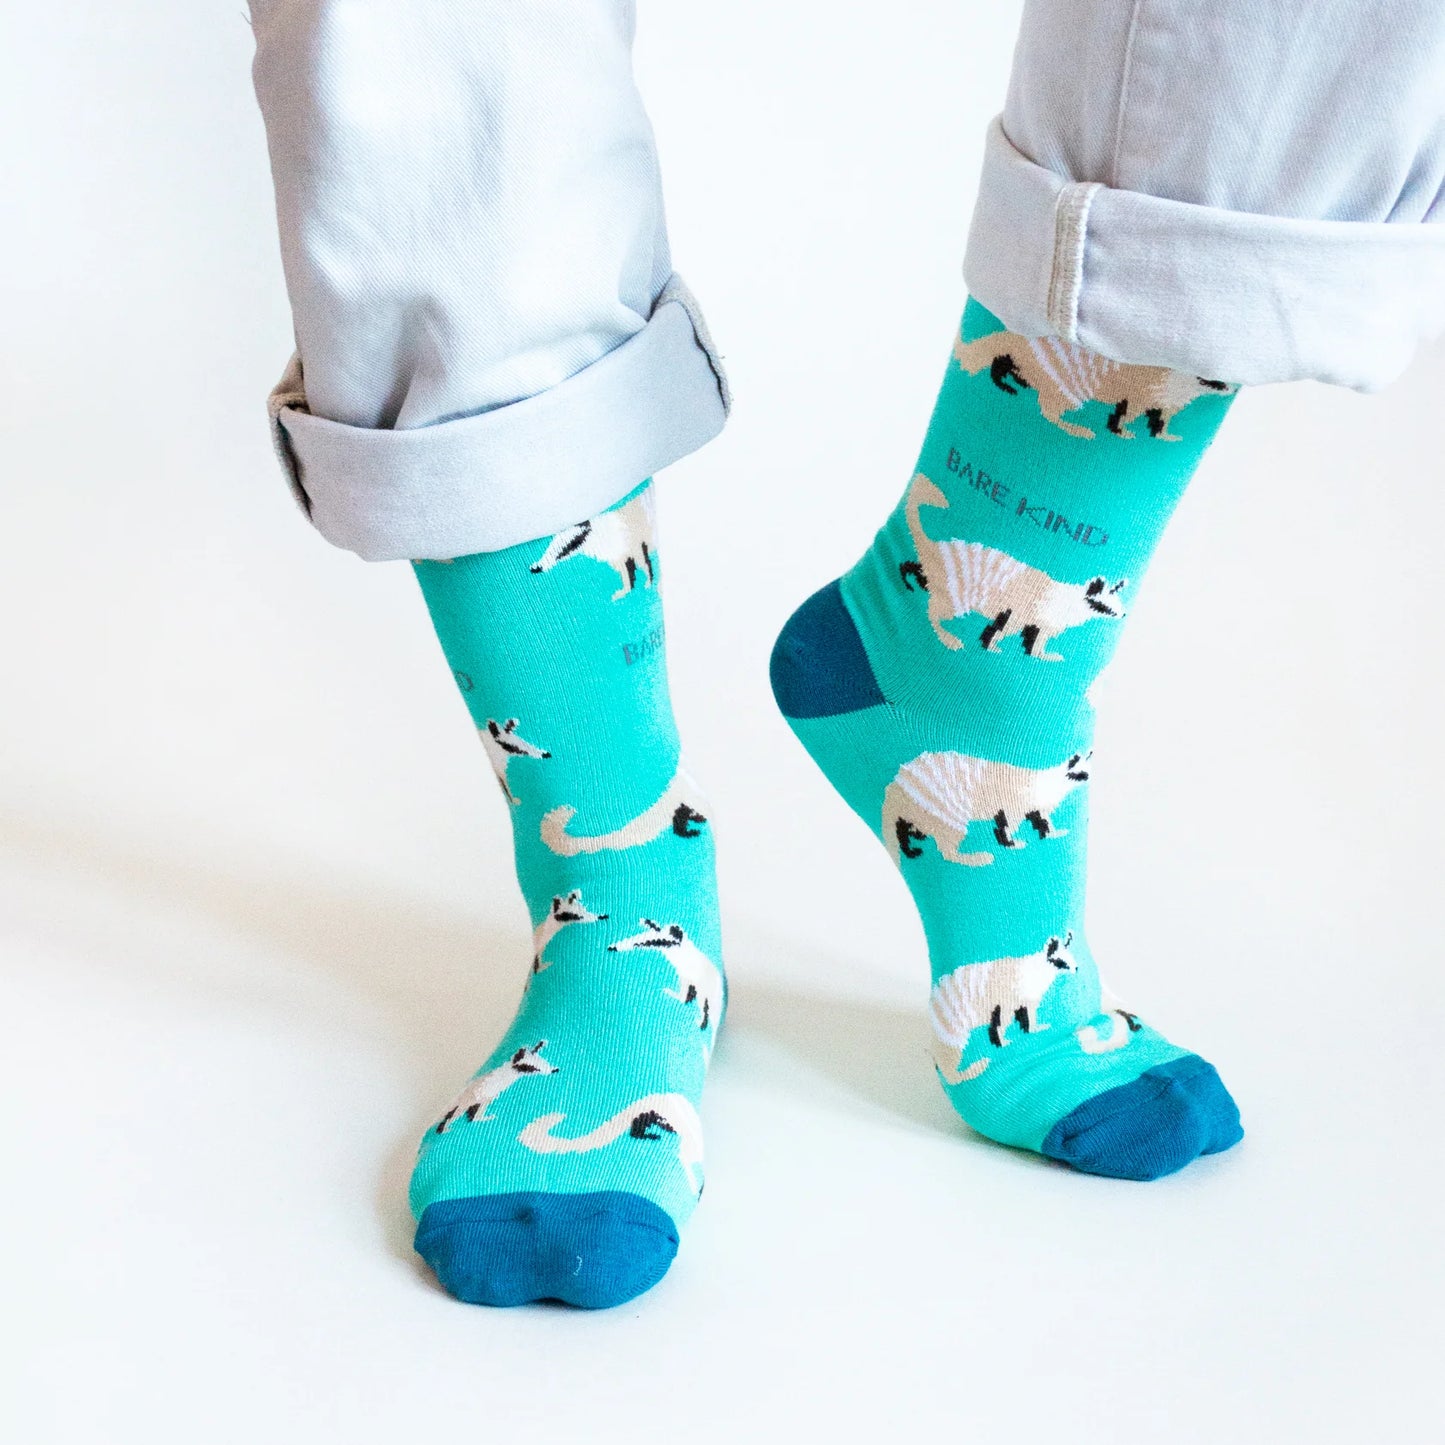 Bare Kind Bamboo Socks - Save the Numbats